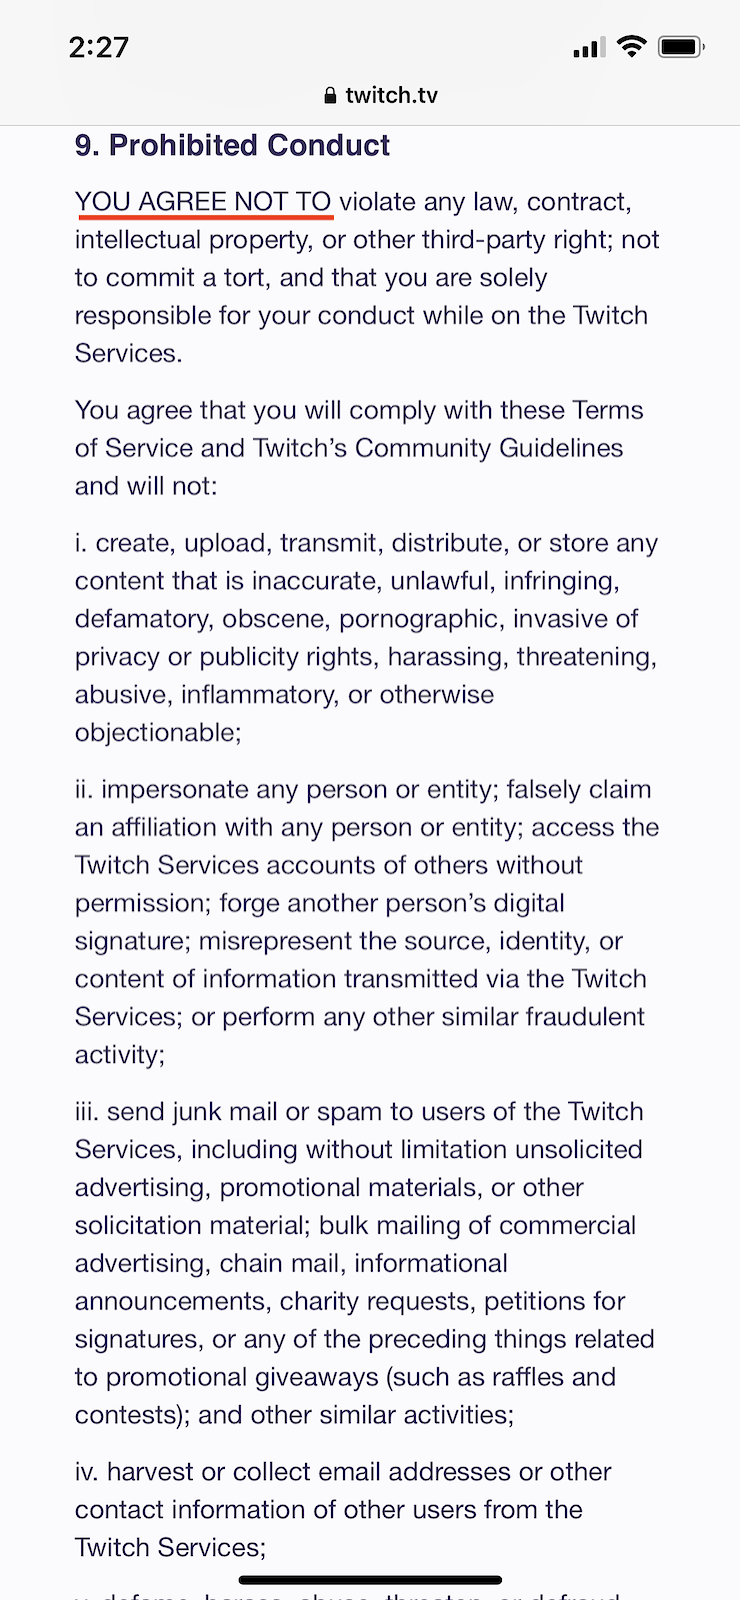 Twitch-mobile-app-terms-and-conditions-prohibited-use-clause